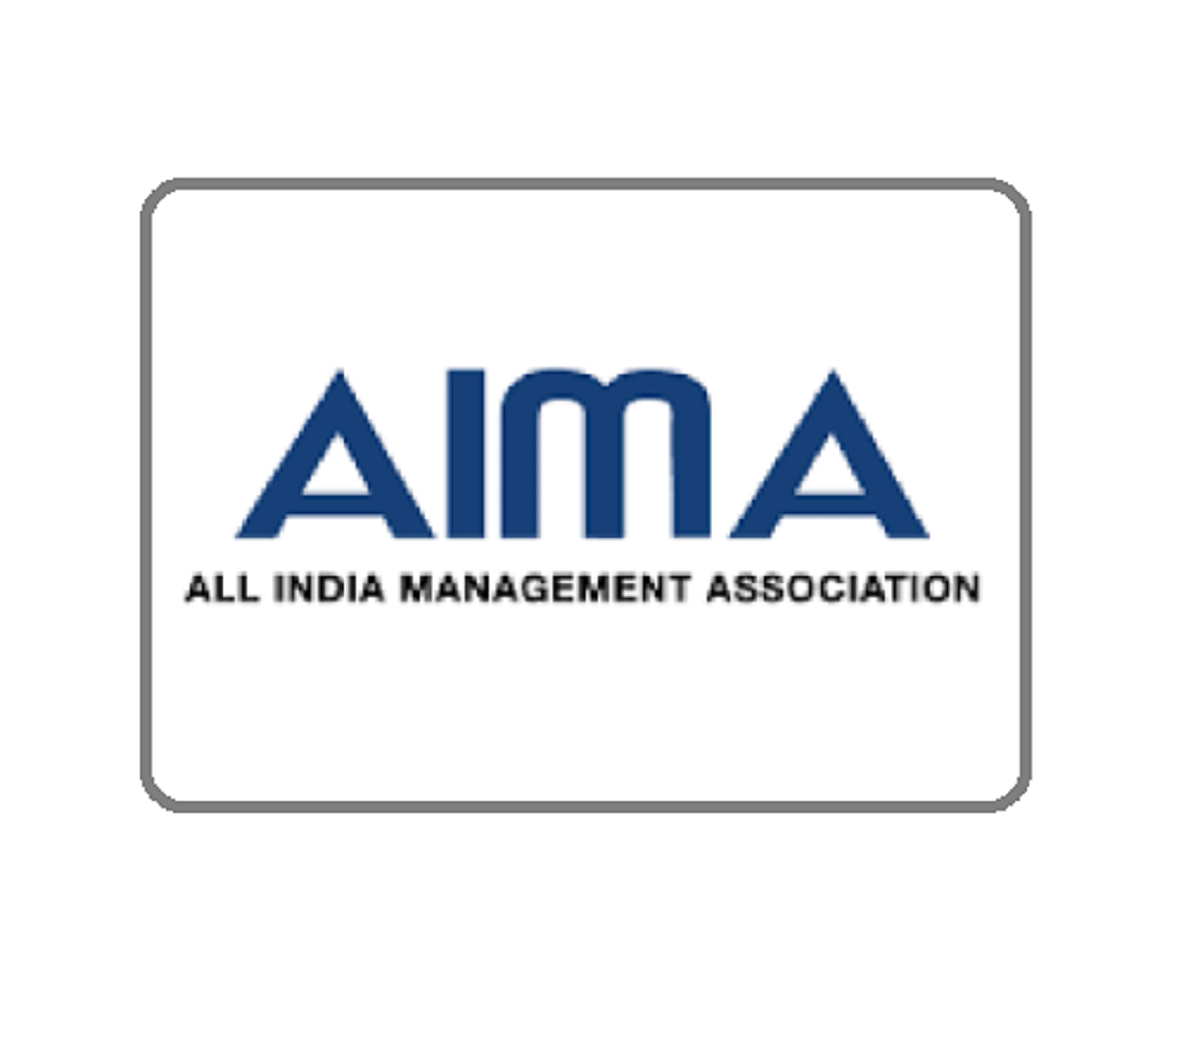 AIMA MAT February 2020: Application Process Concludes Today,